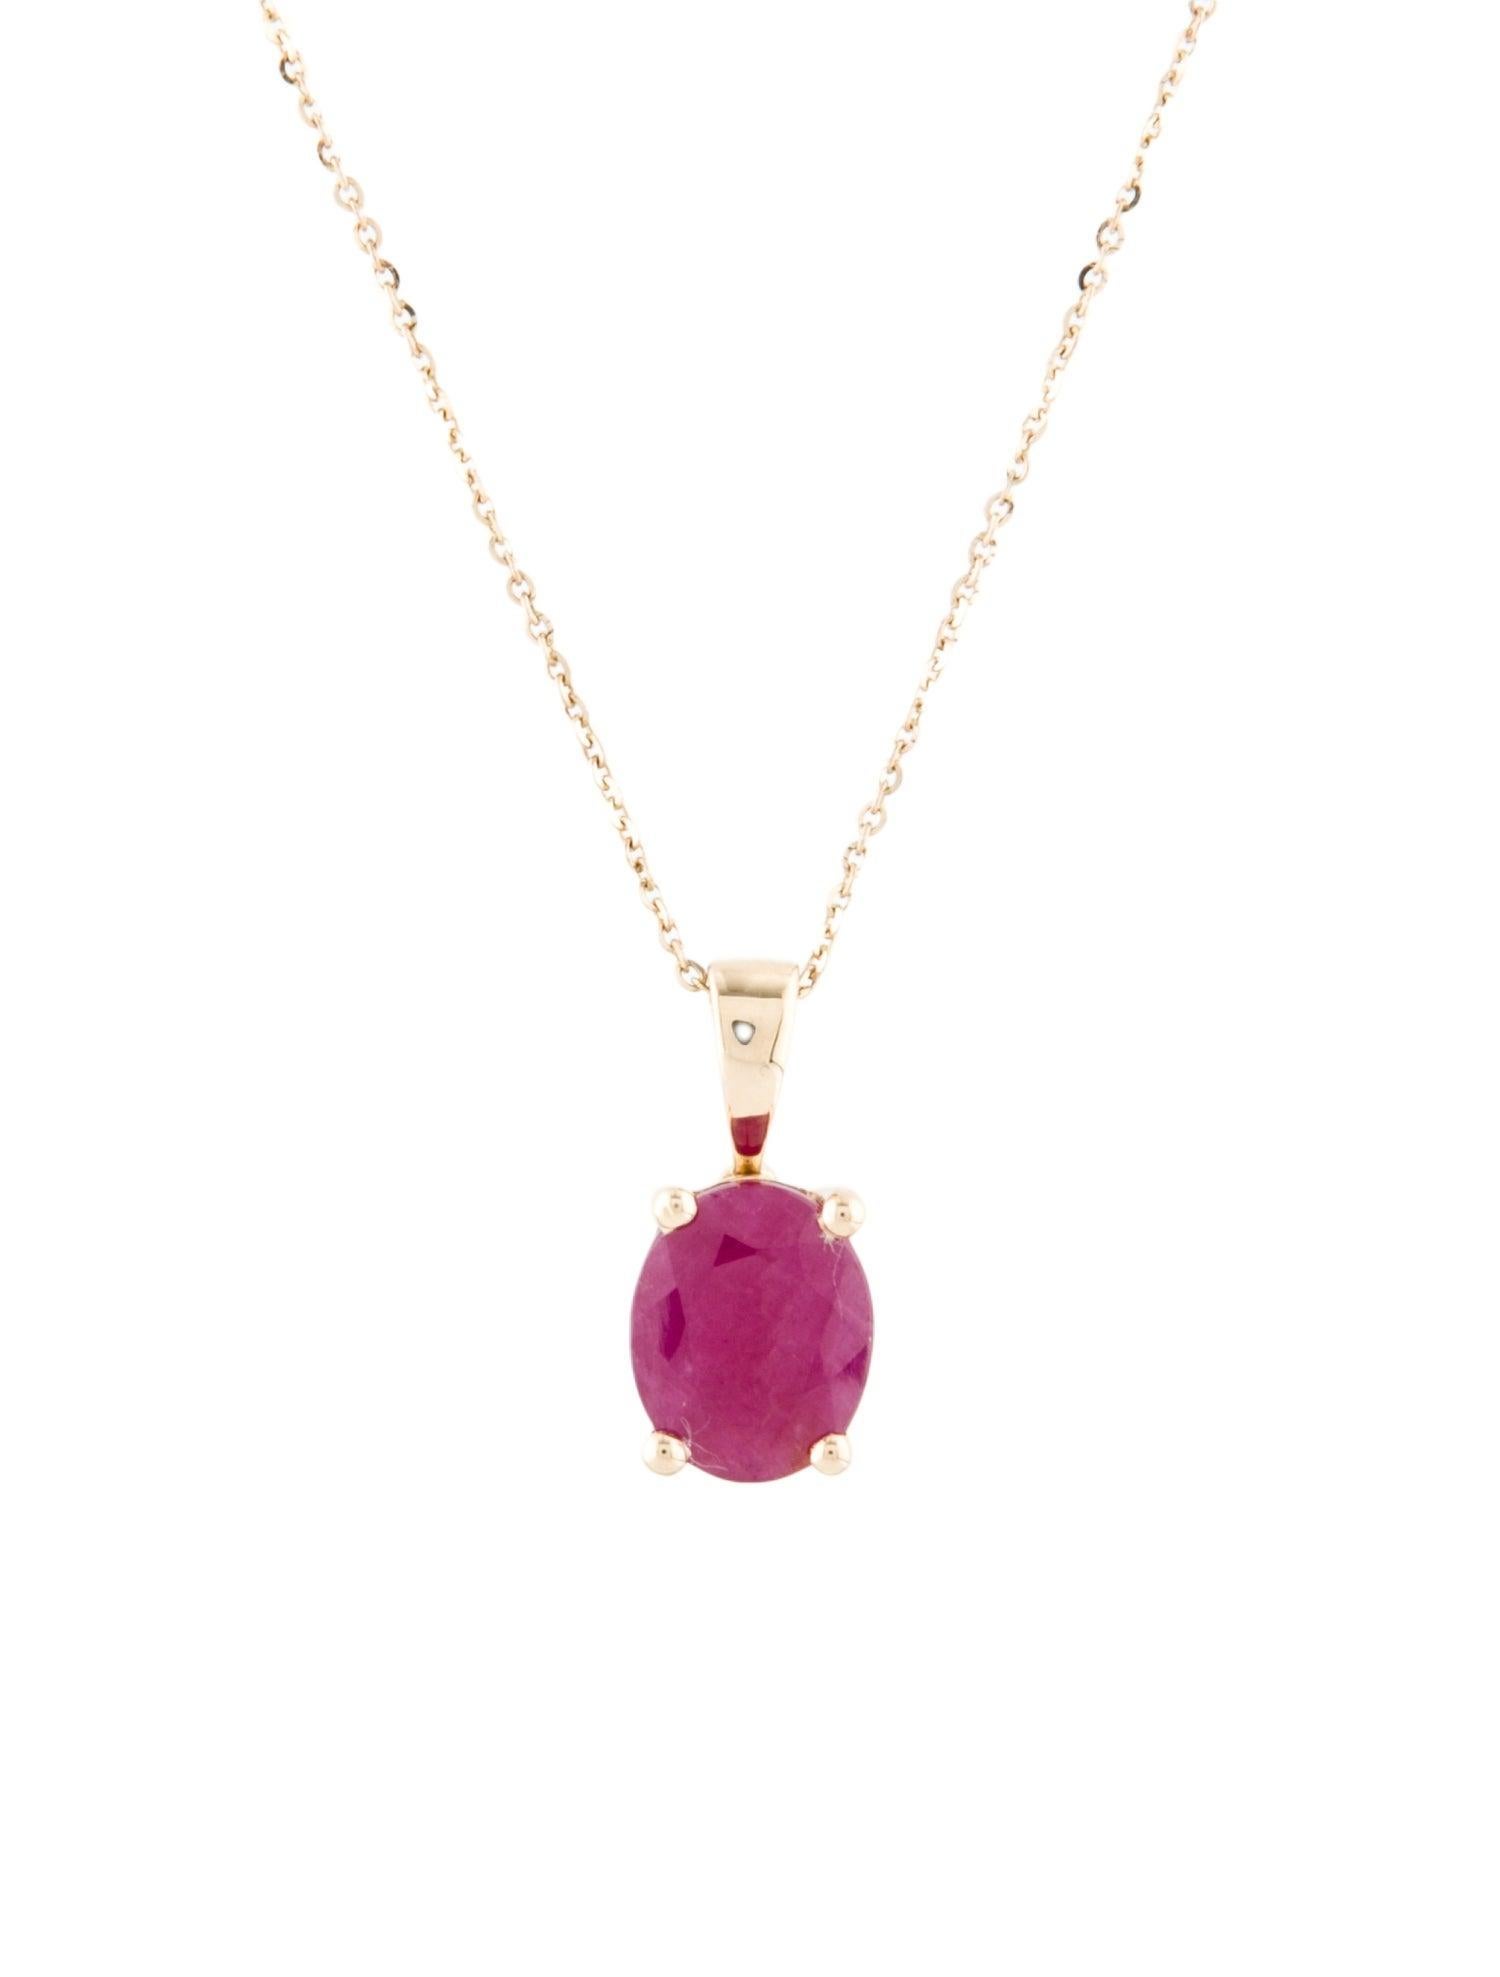 Oval Cut Luxurious 14K Yellow Gold Oval Ruby Pendant Necklace, 2.87ct, 18